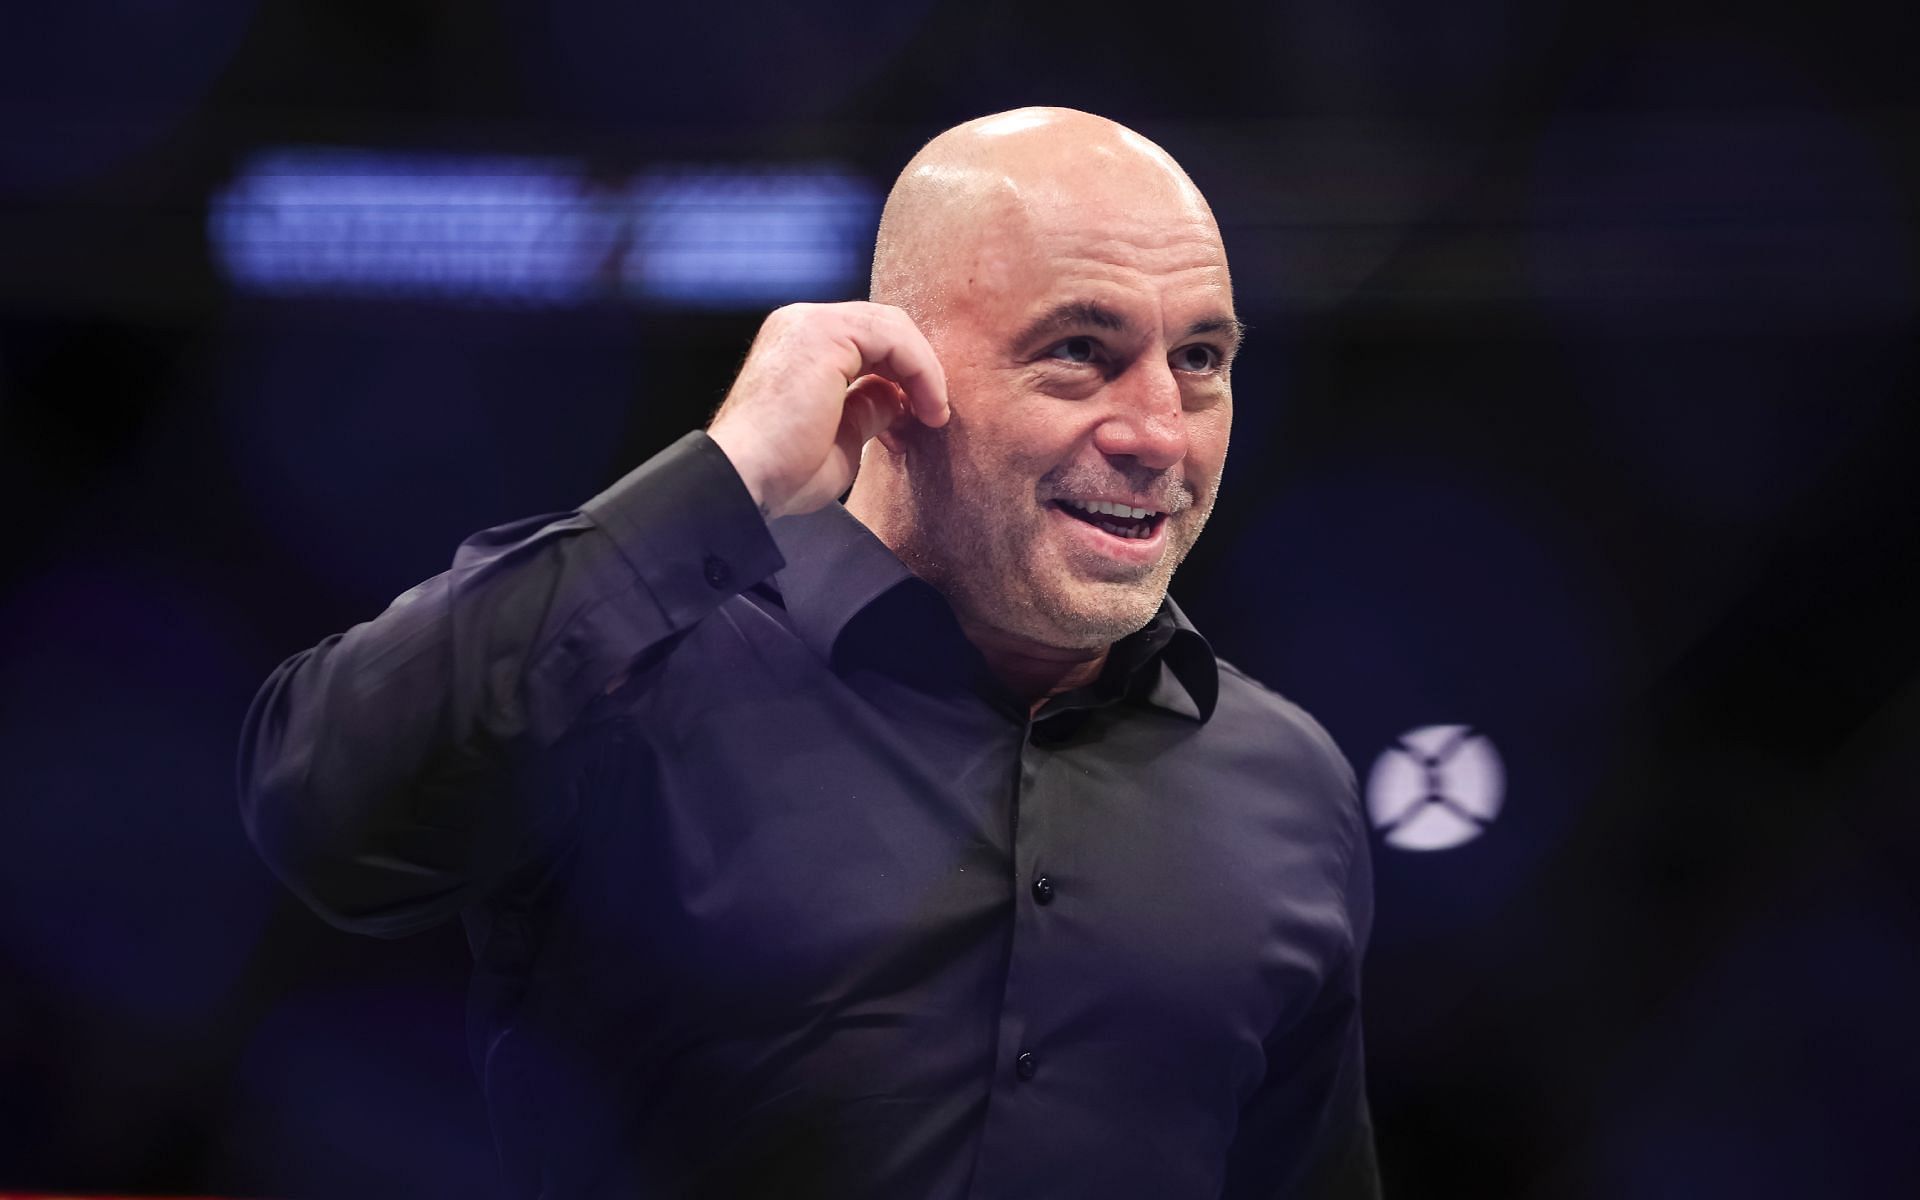 Company co-founded by Joe Rogan under legal scrutiny [Image via: Getty Images] 